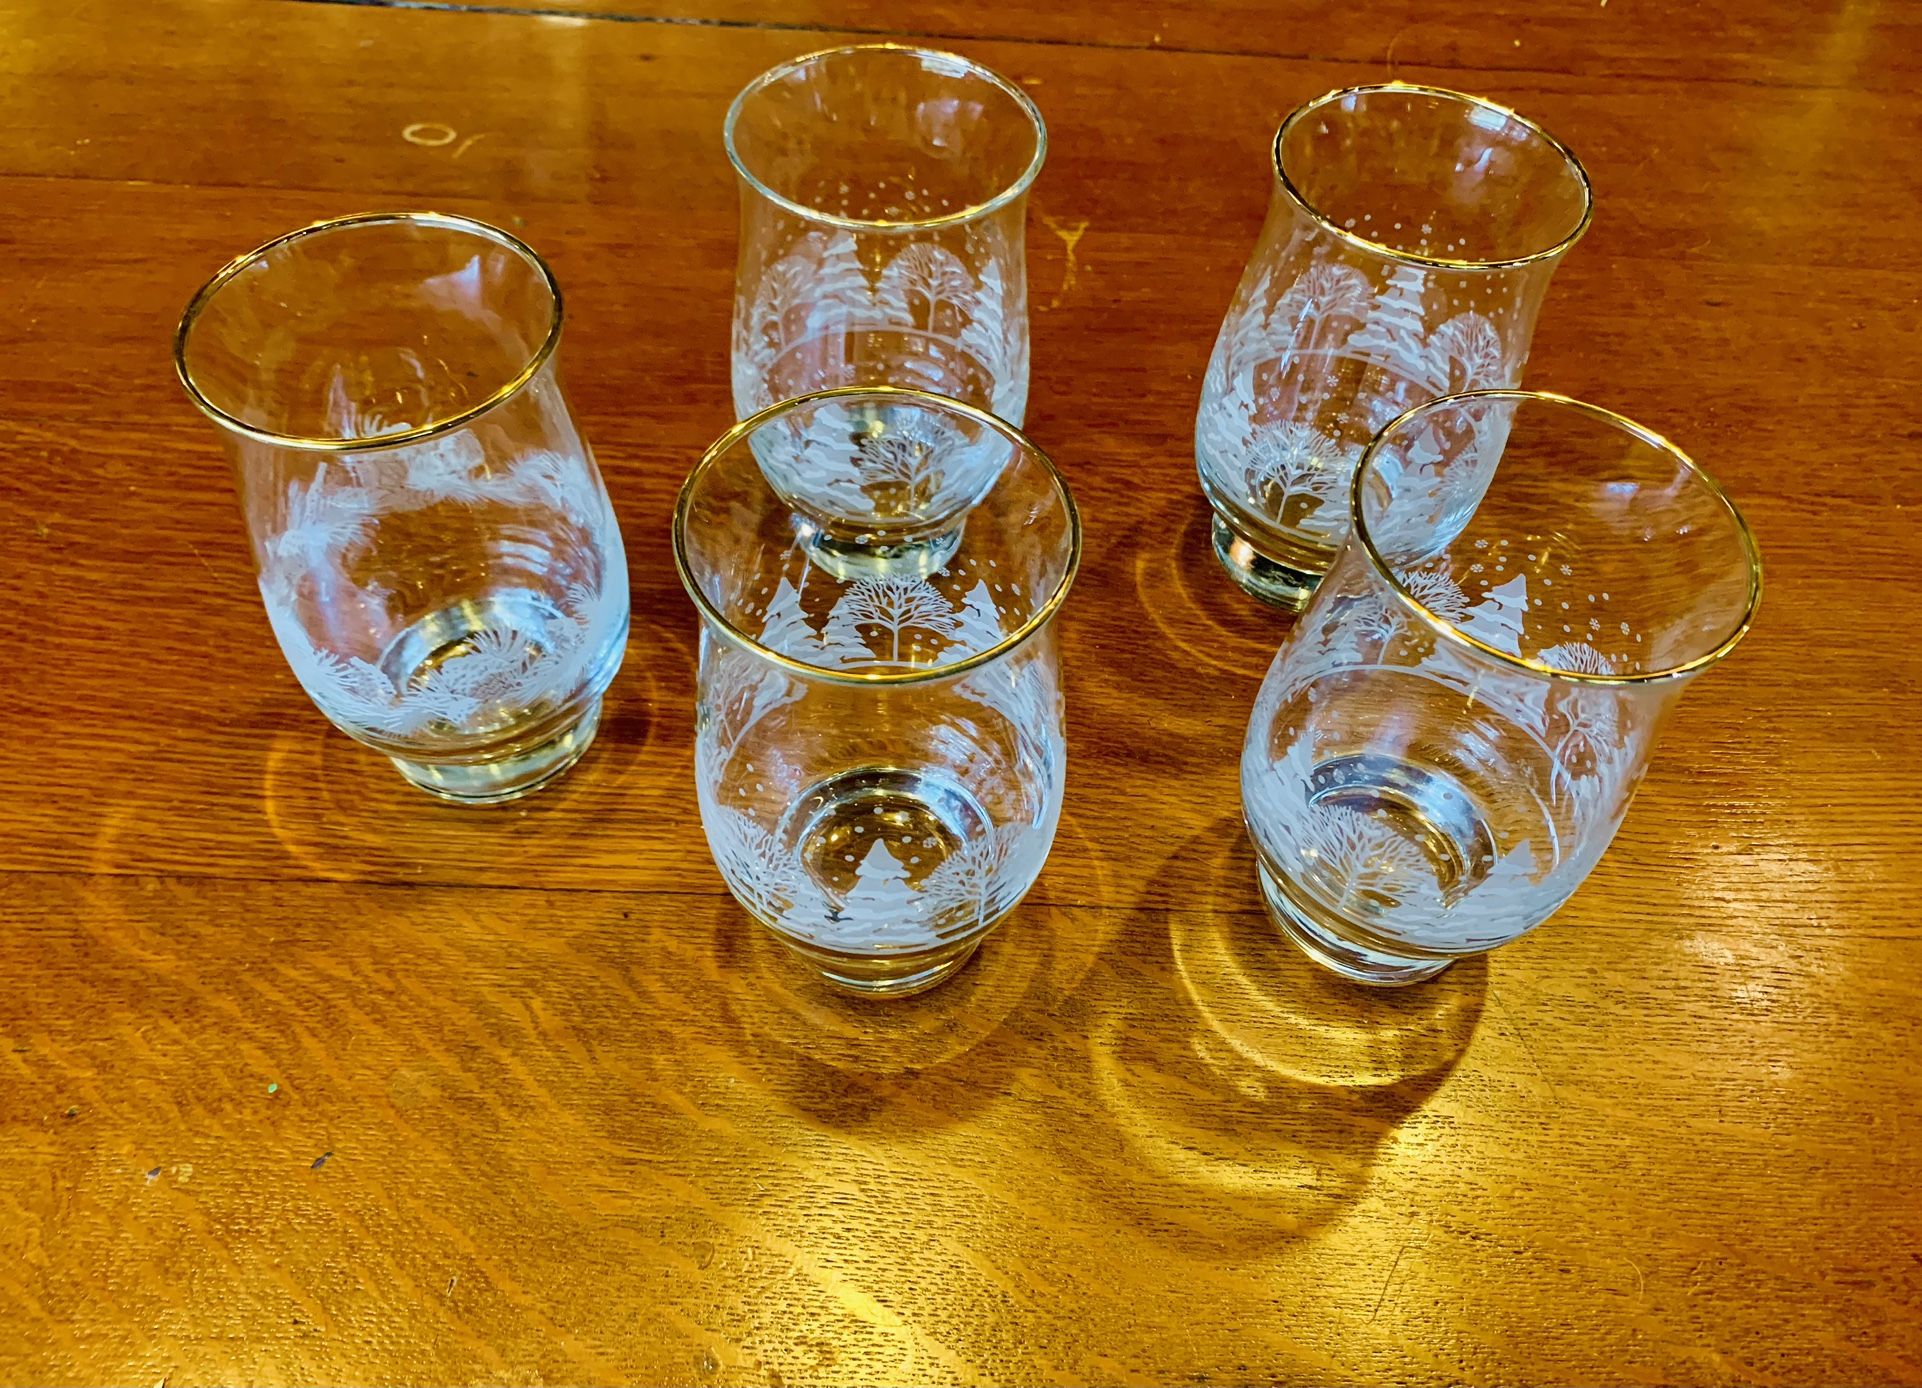 Vintage Libby Winter Wonderland Frosted Set Of 5 Glasses Tumblers With Gold Rim